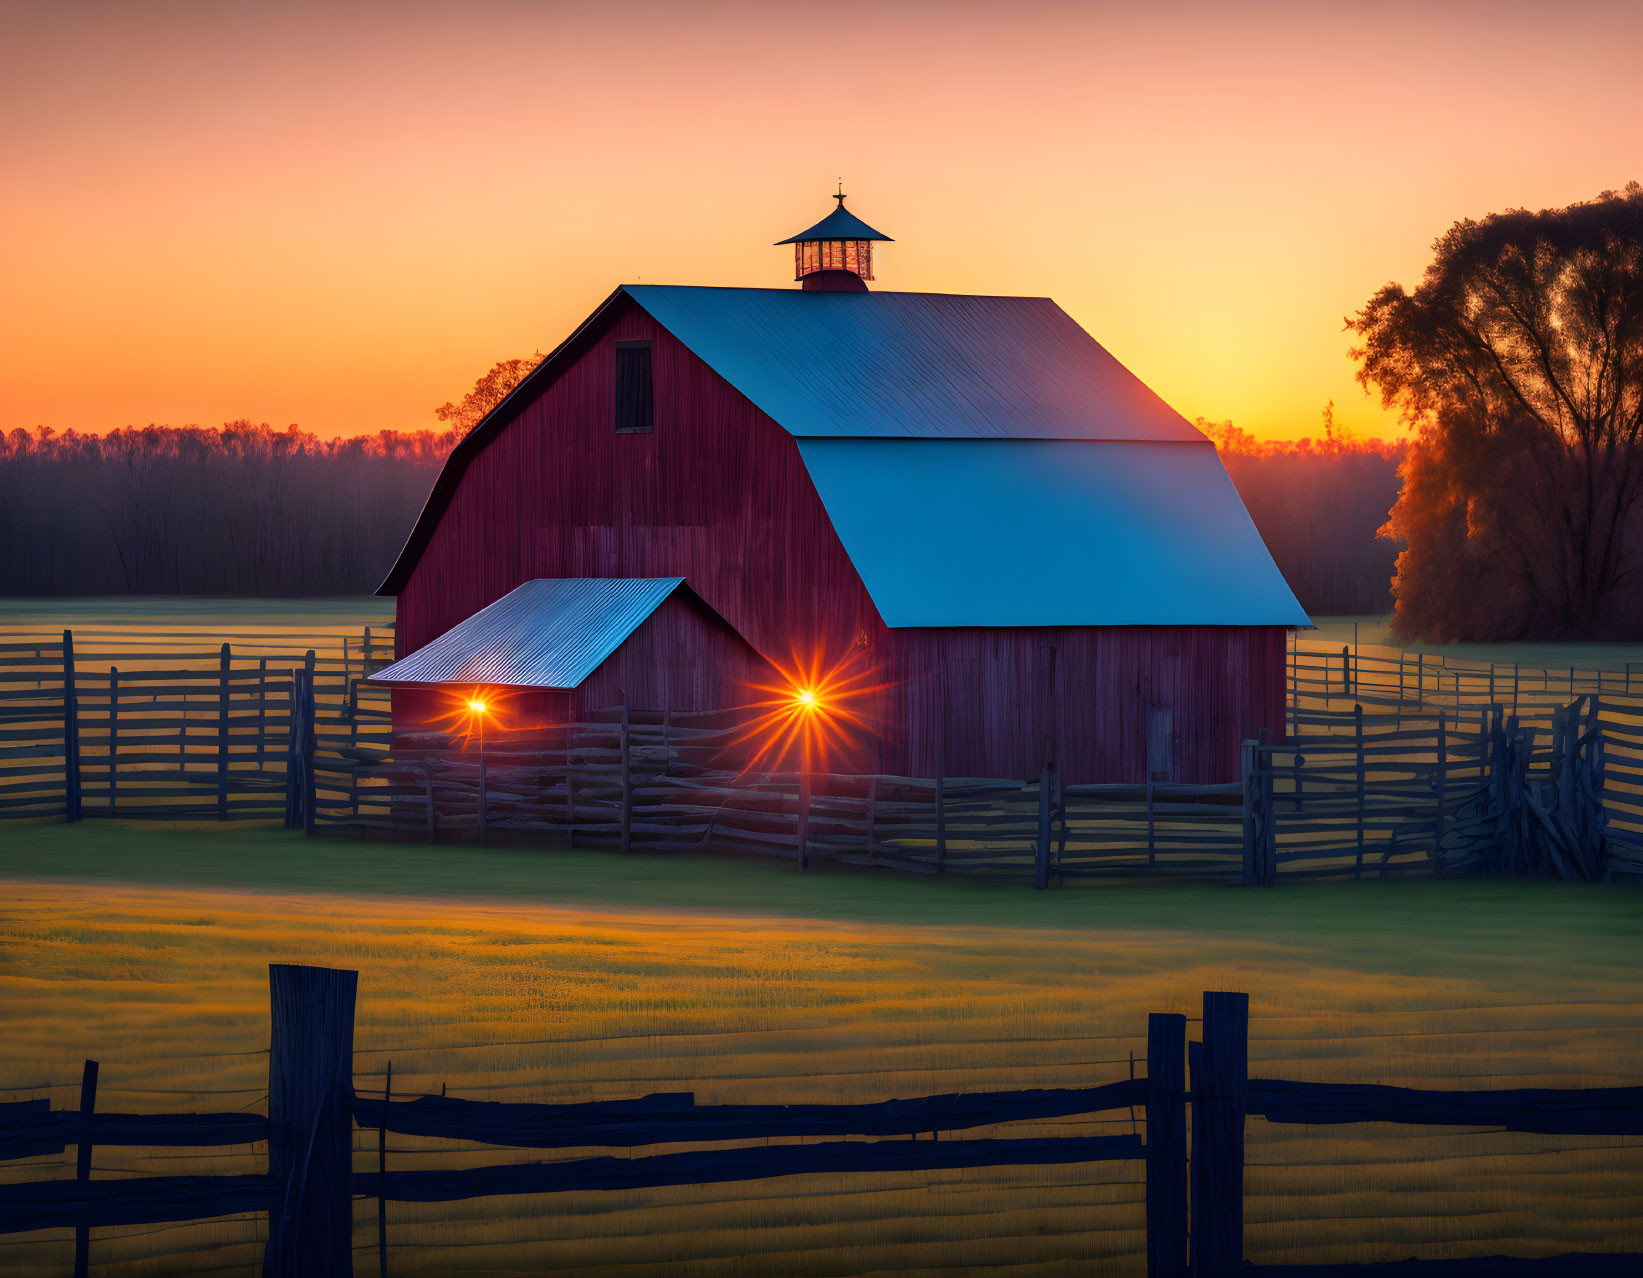 Red Barn with Cupola Reflecting Golden Sunrise in Pastoral Field